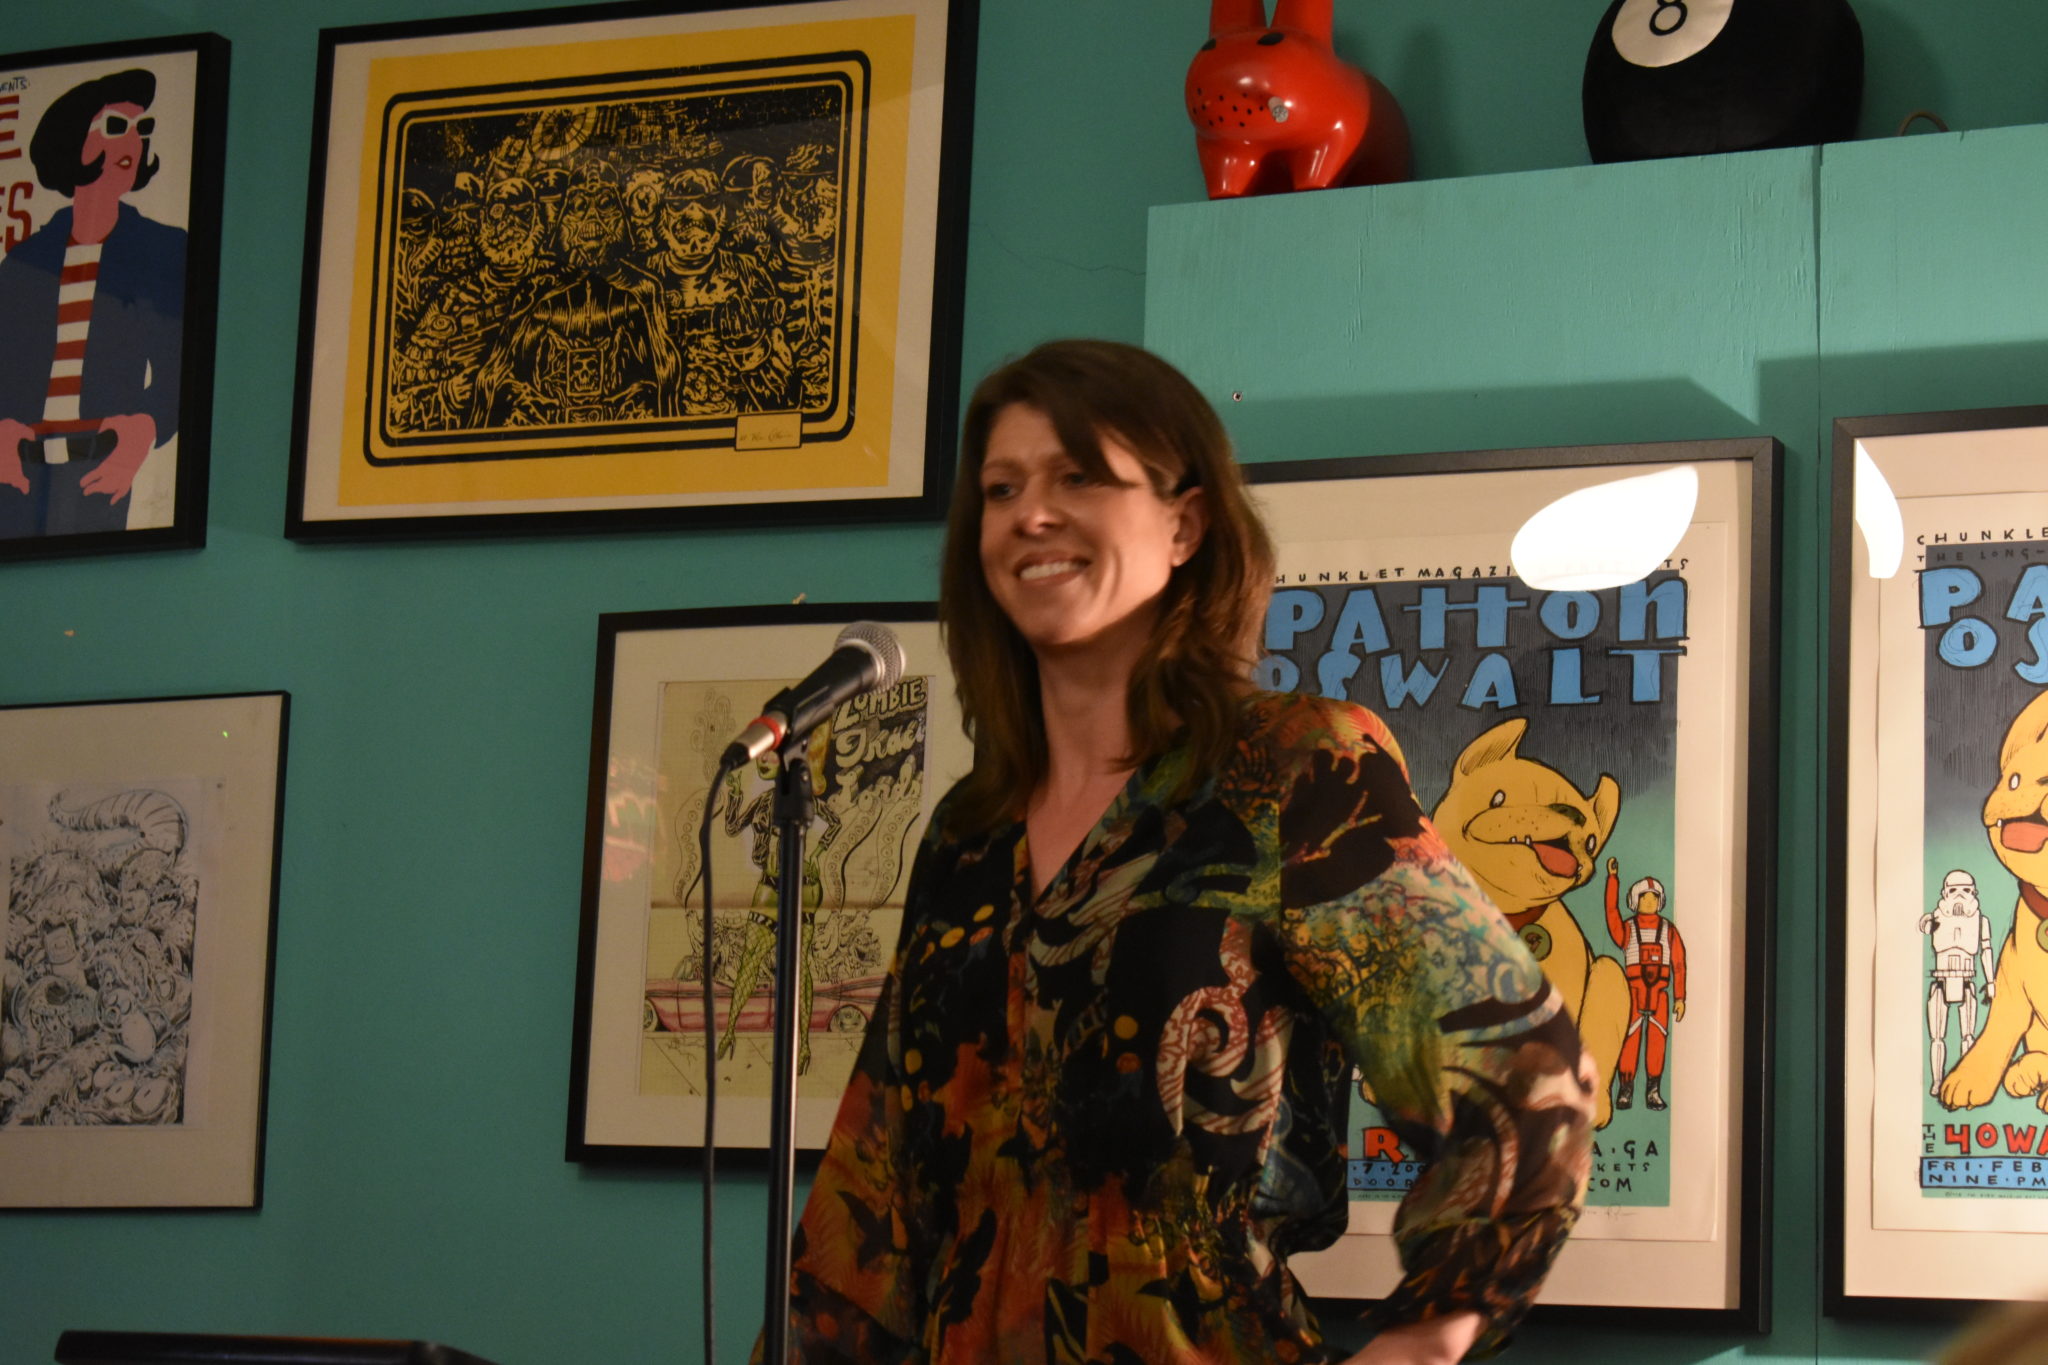 Elizabeth Hazen reads from her collection "Girls Like Us" at Baltimore's Atomic Books